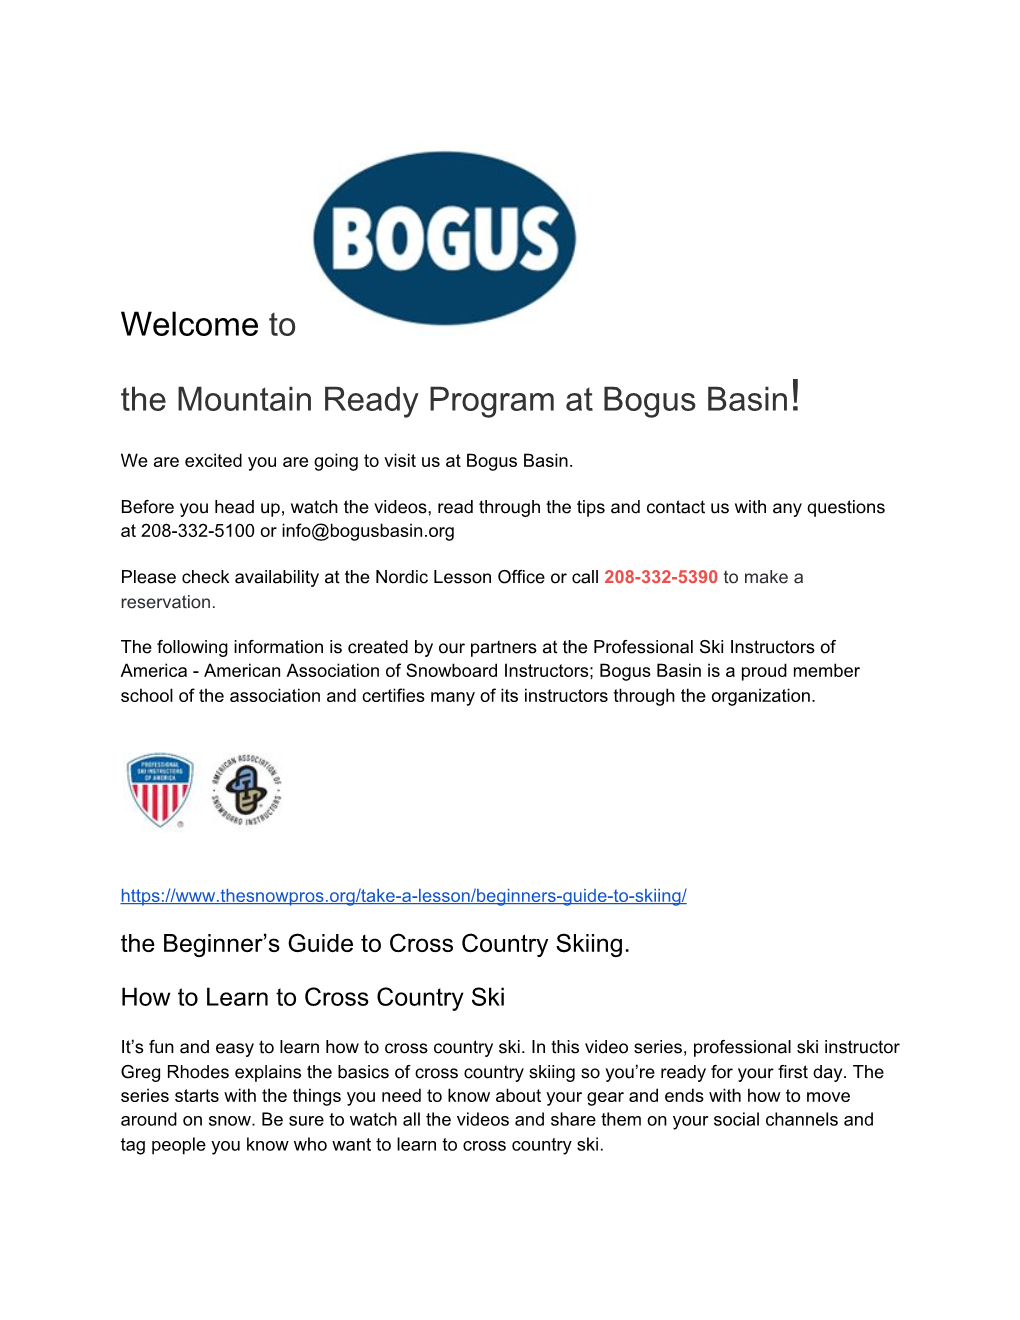 Welcome ​To the Mountain Ready Program at Bogus Basin​!